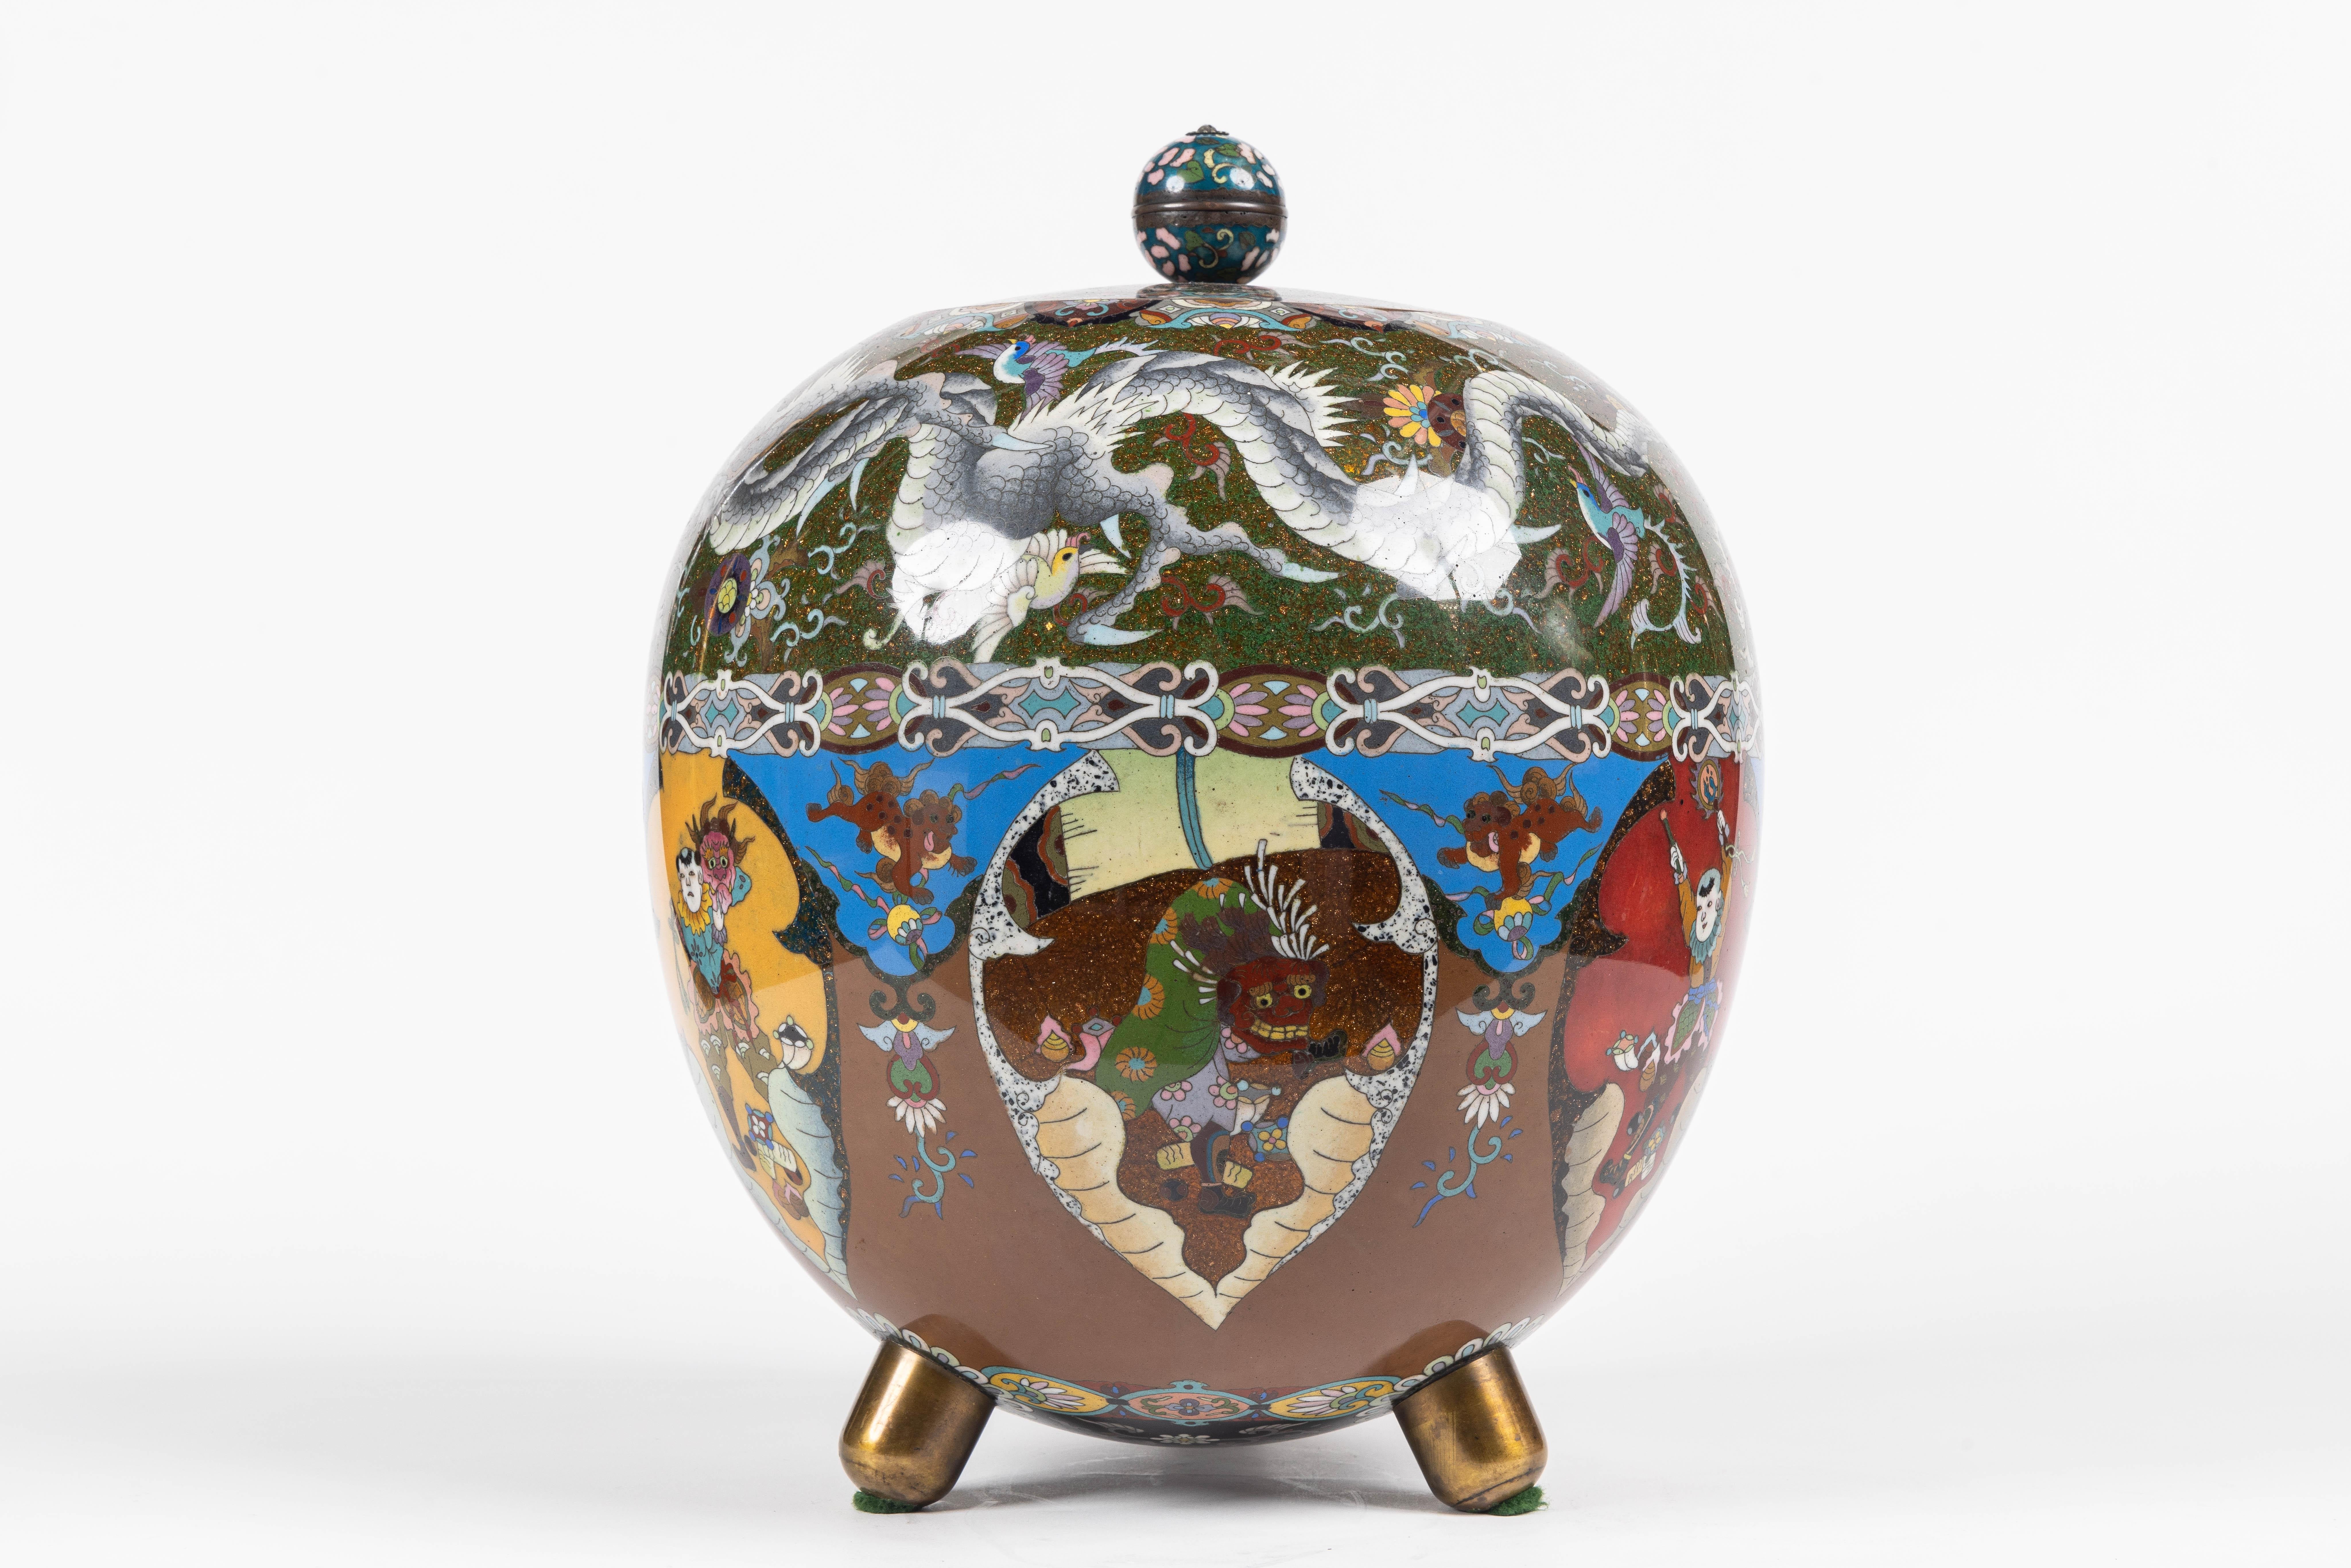 Meiji Majestic Japanese Cloisonne Enamel Covered Jar with Dragons, Theater Characters  For Sale